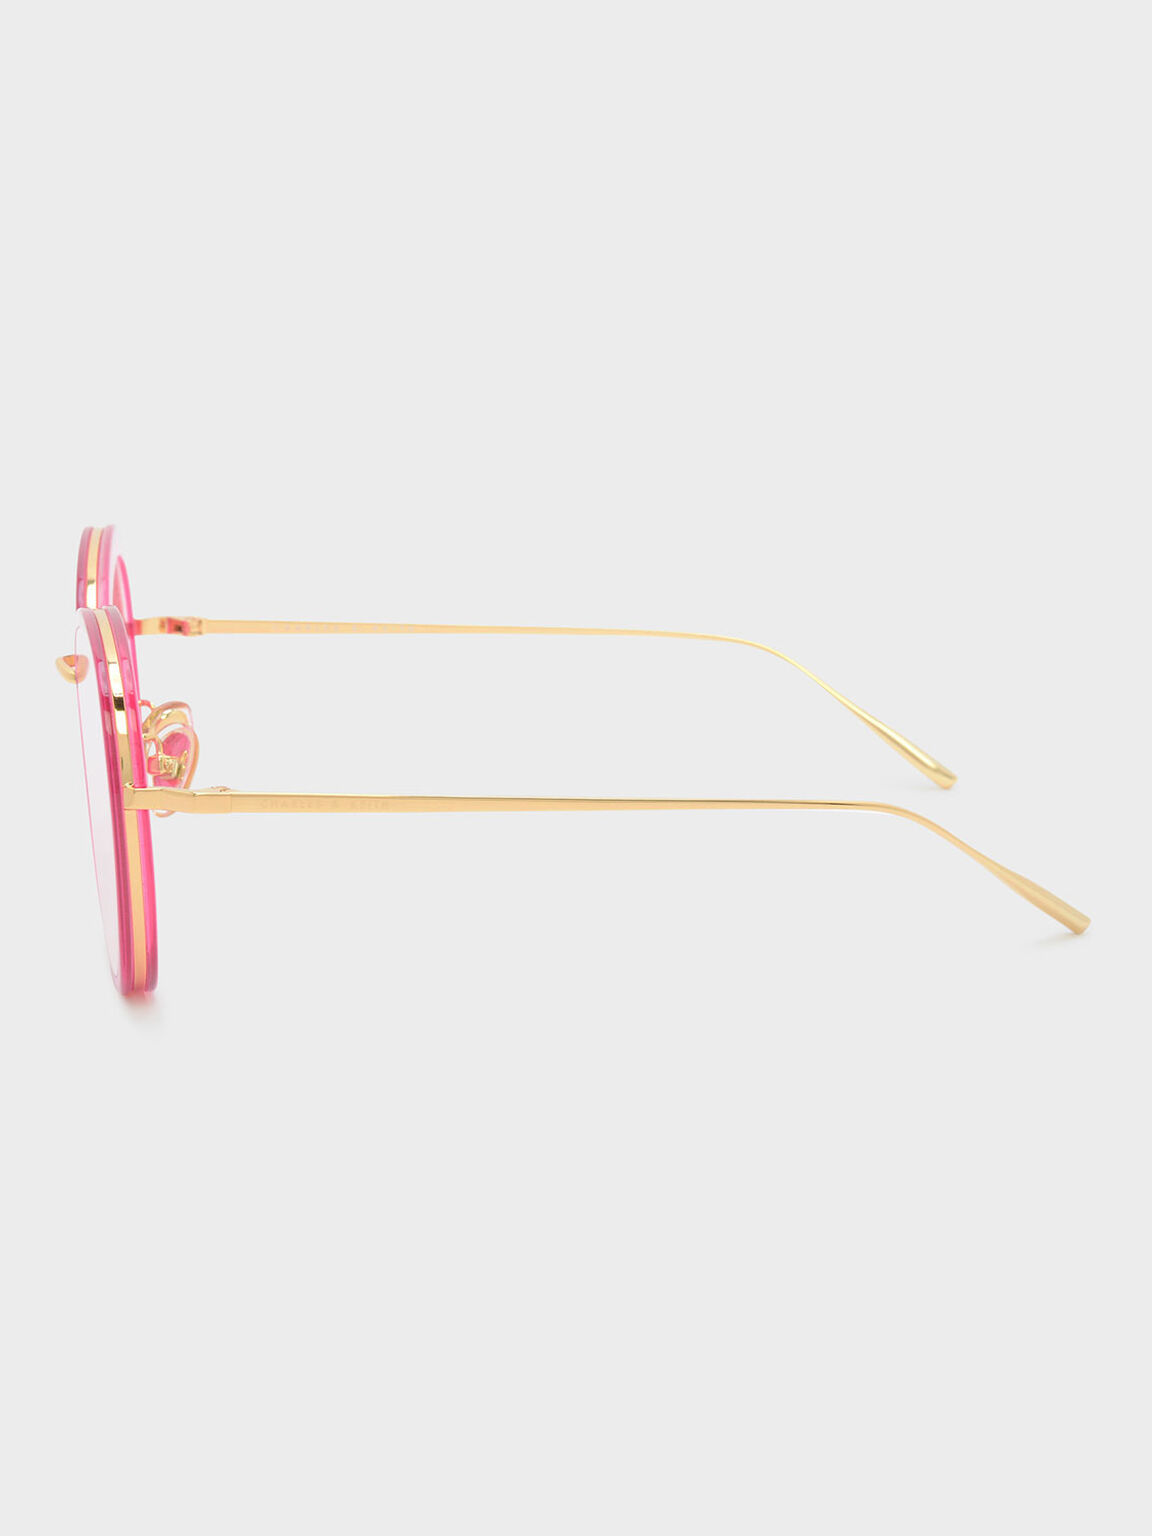 Acetate Butterfly Frame Shades, Pink, hi-res